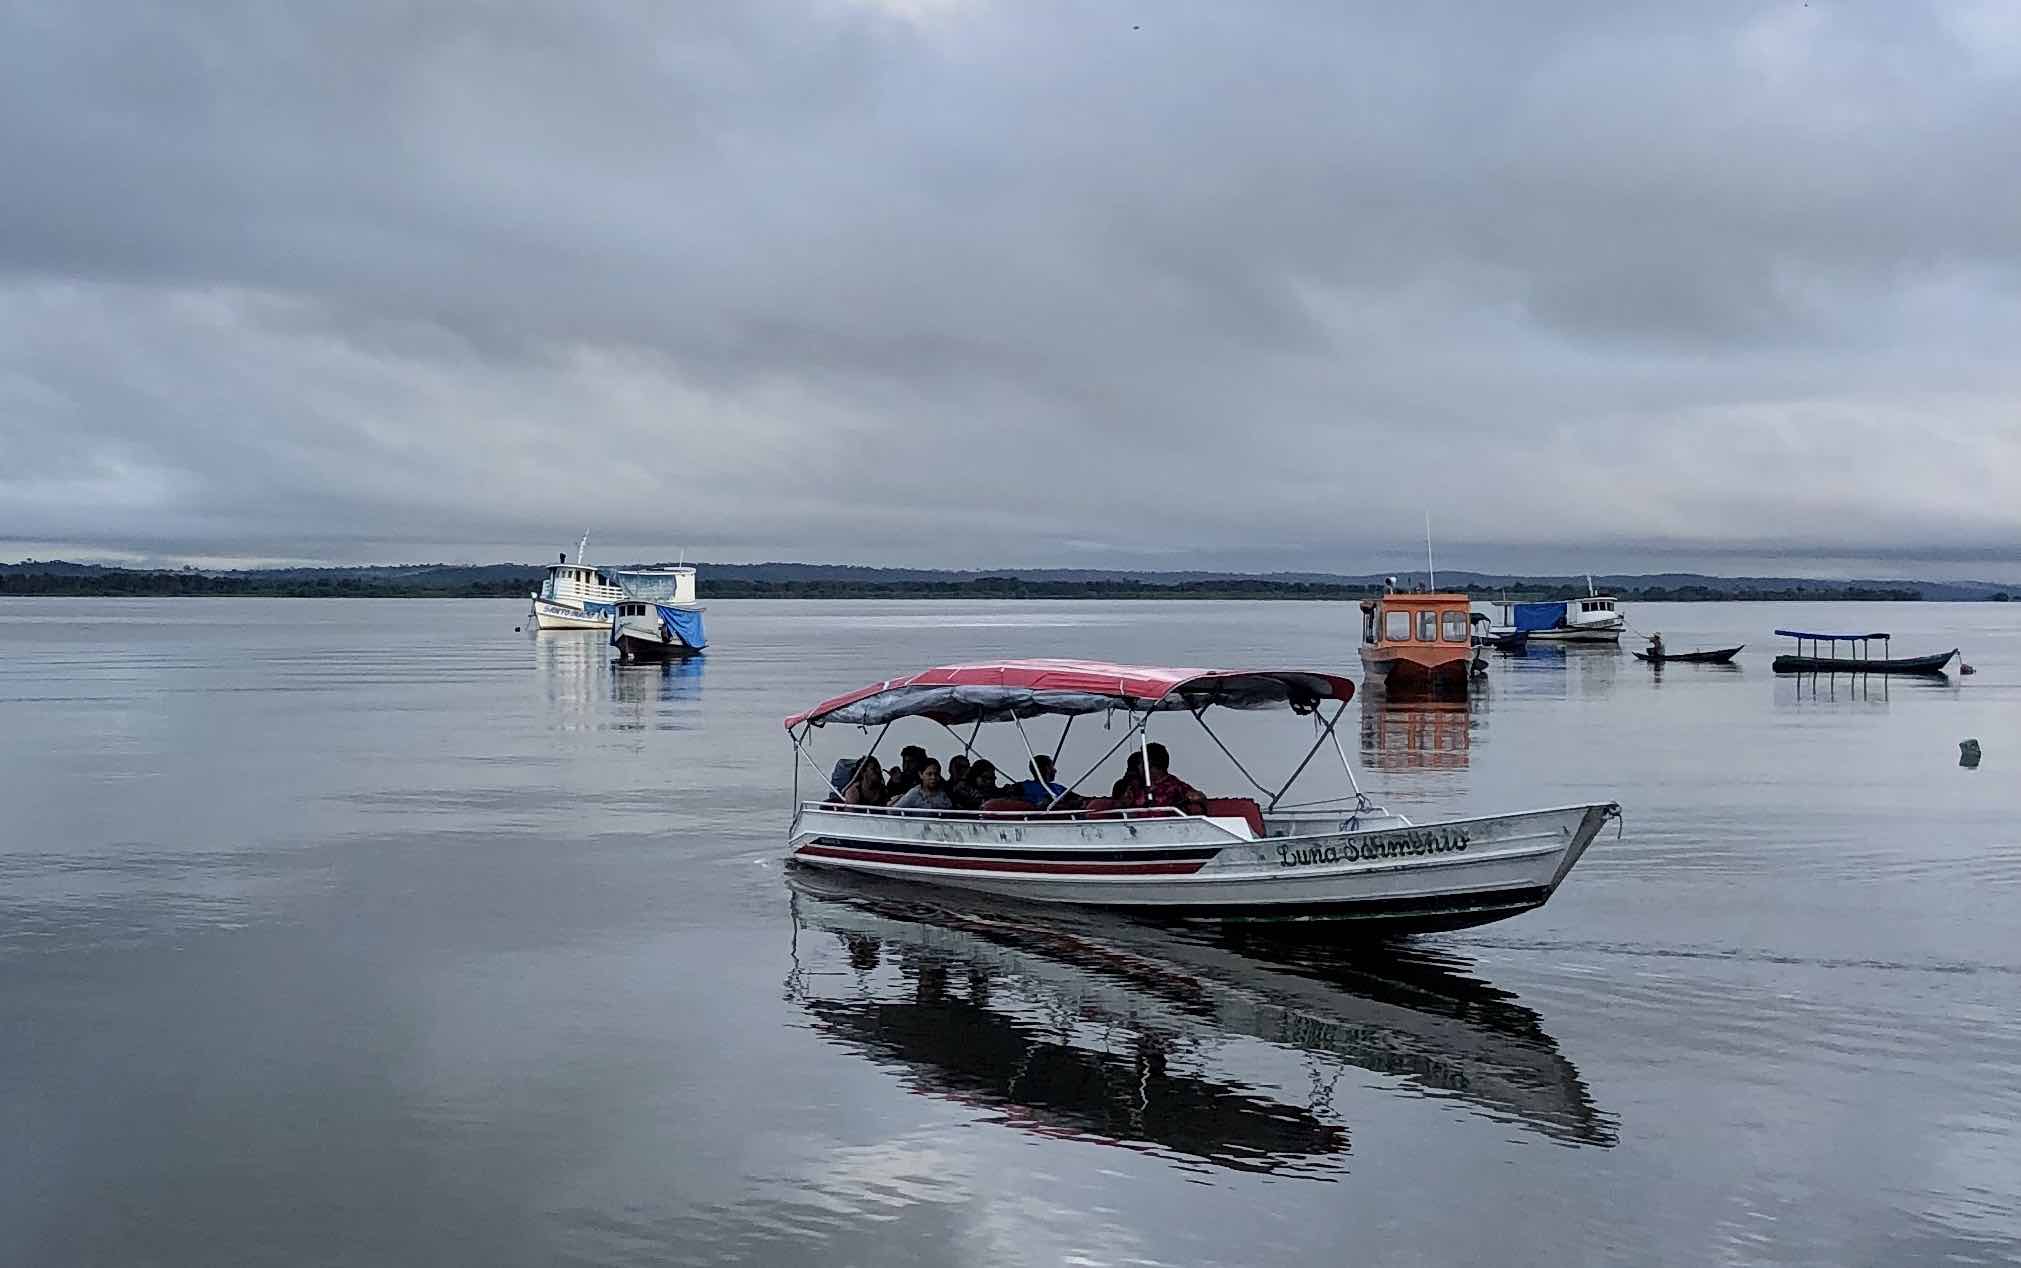 A boat with canopy with passengers on a river